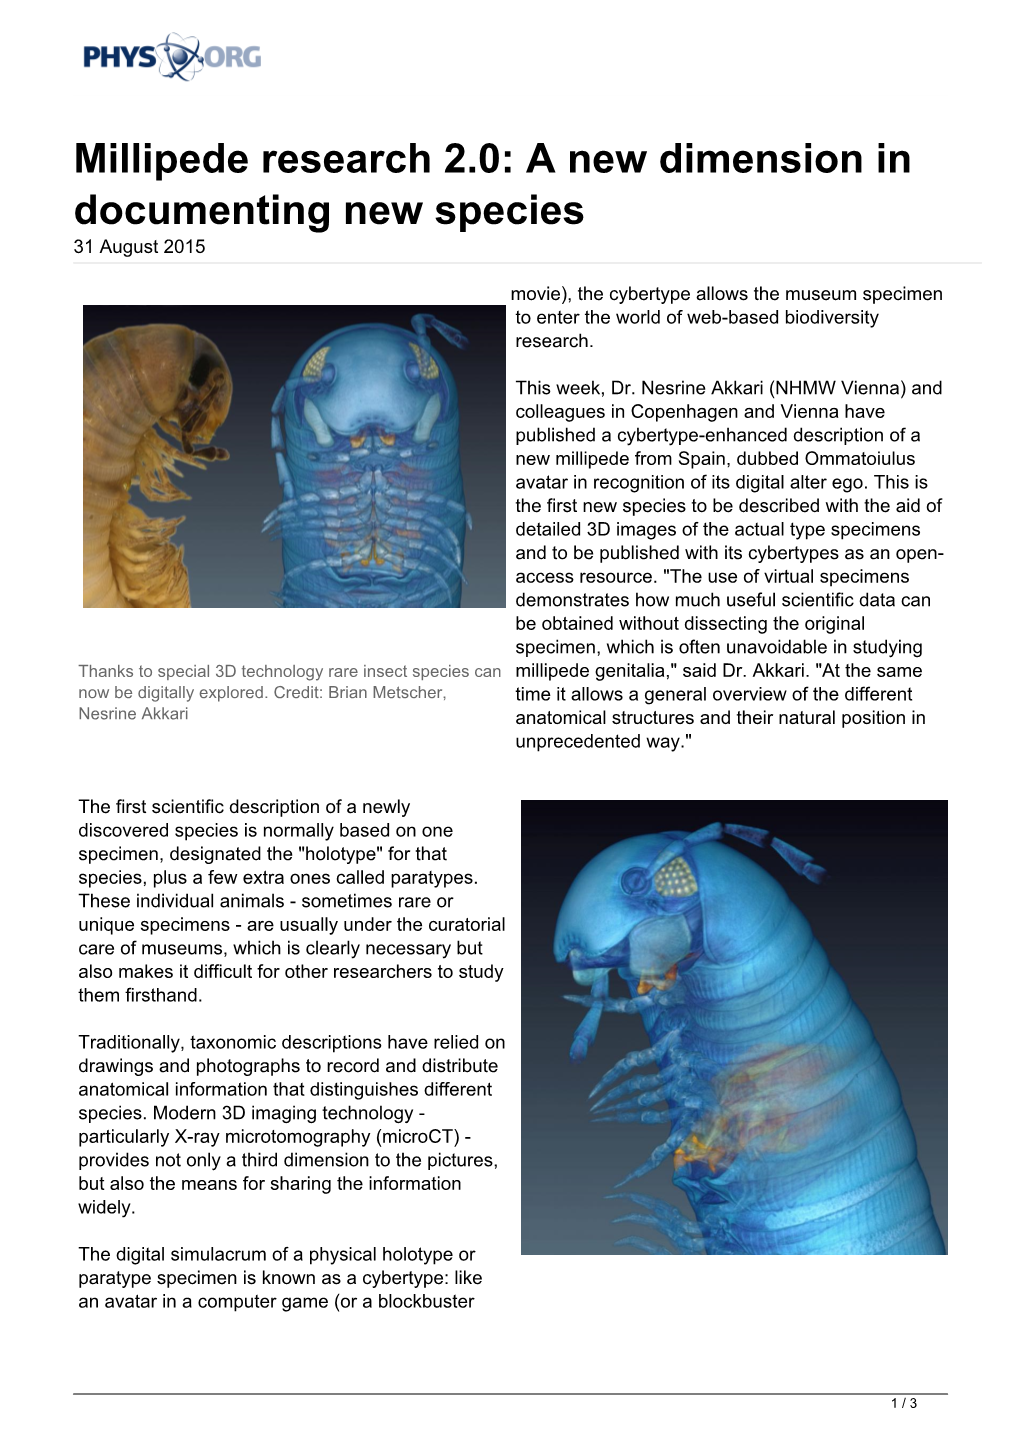 Millipede Research 2.0: a New Dimension in Documenting New Species 31 August 2015